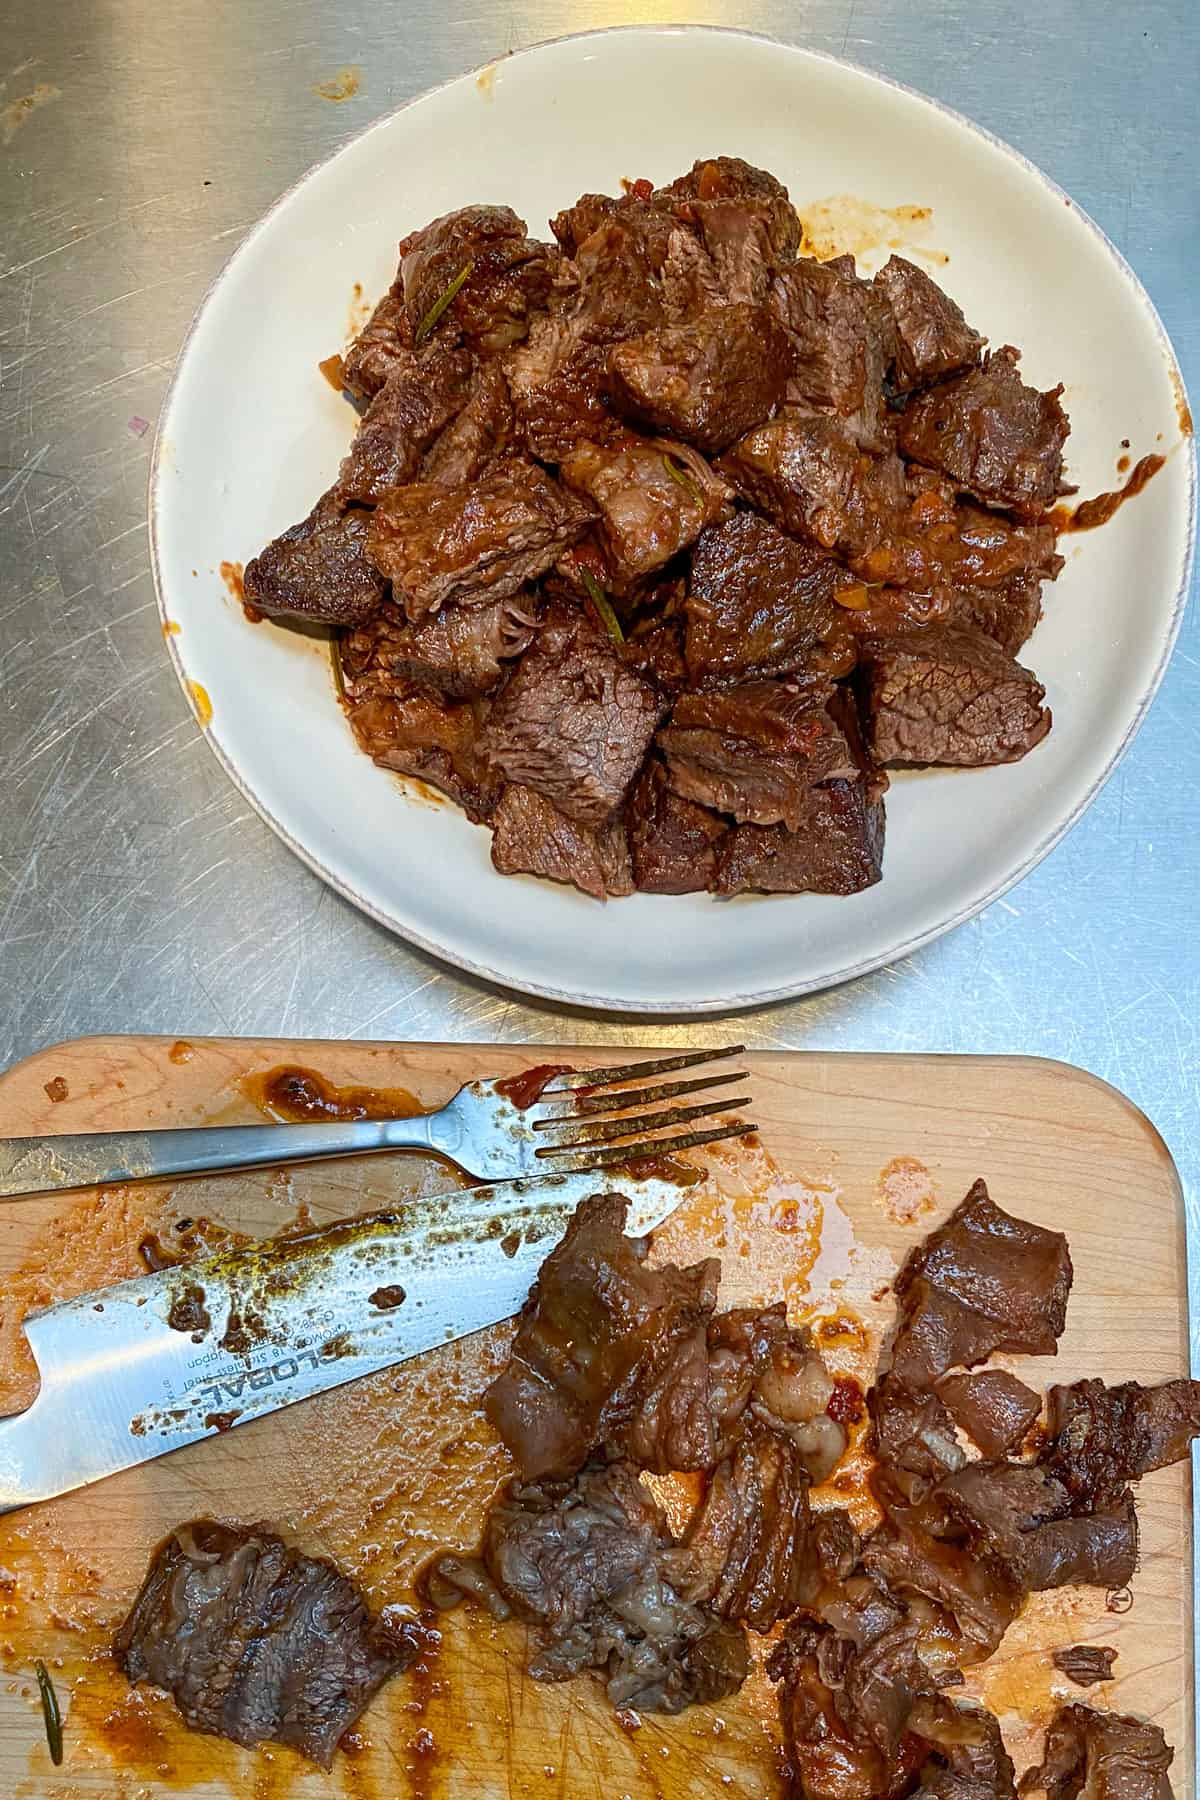 Bite-sized cubes of beef in a bowl with the cutting board nearby.